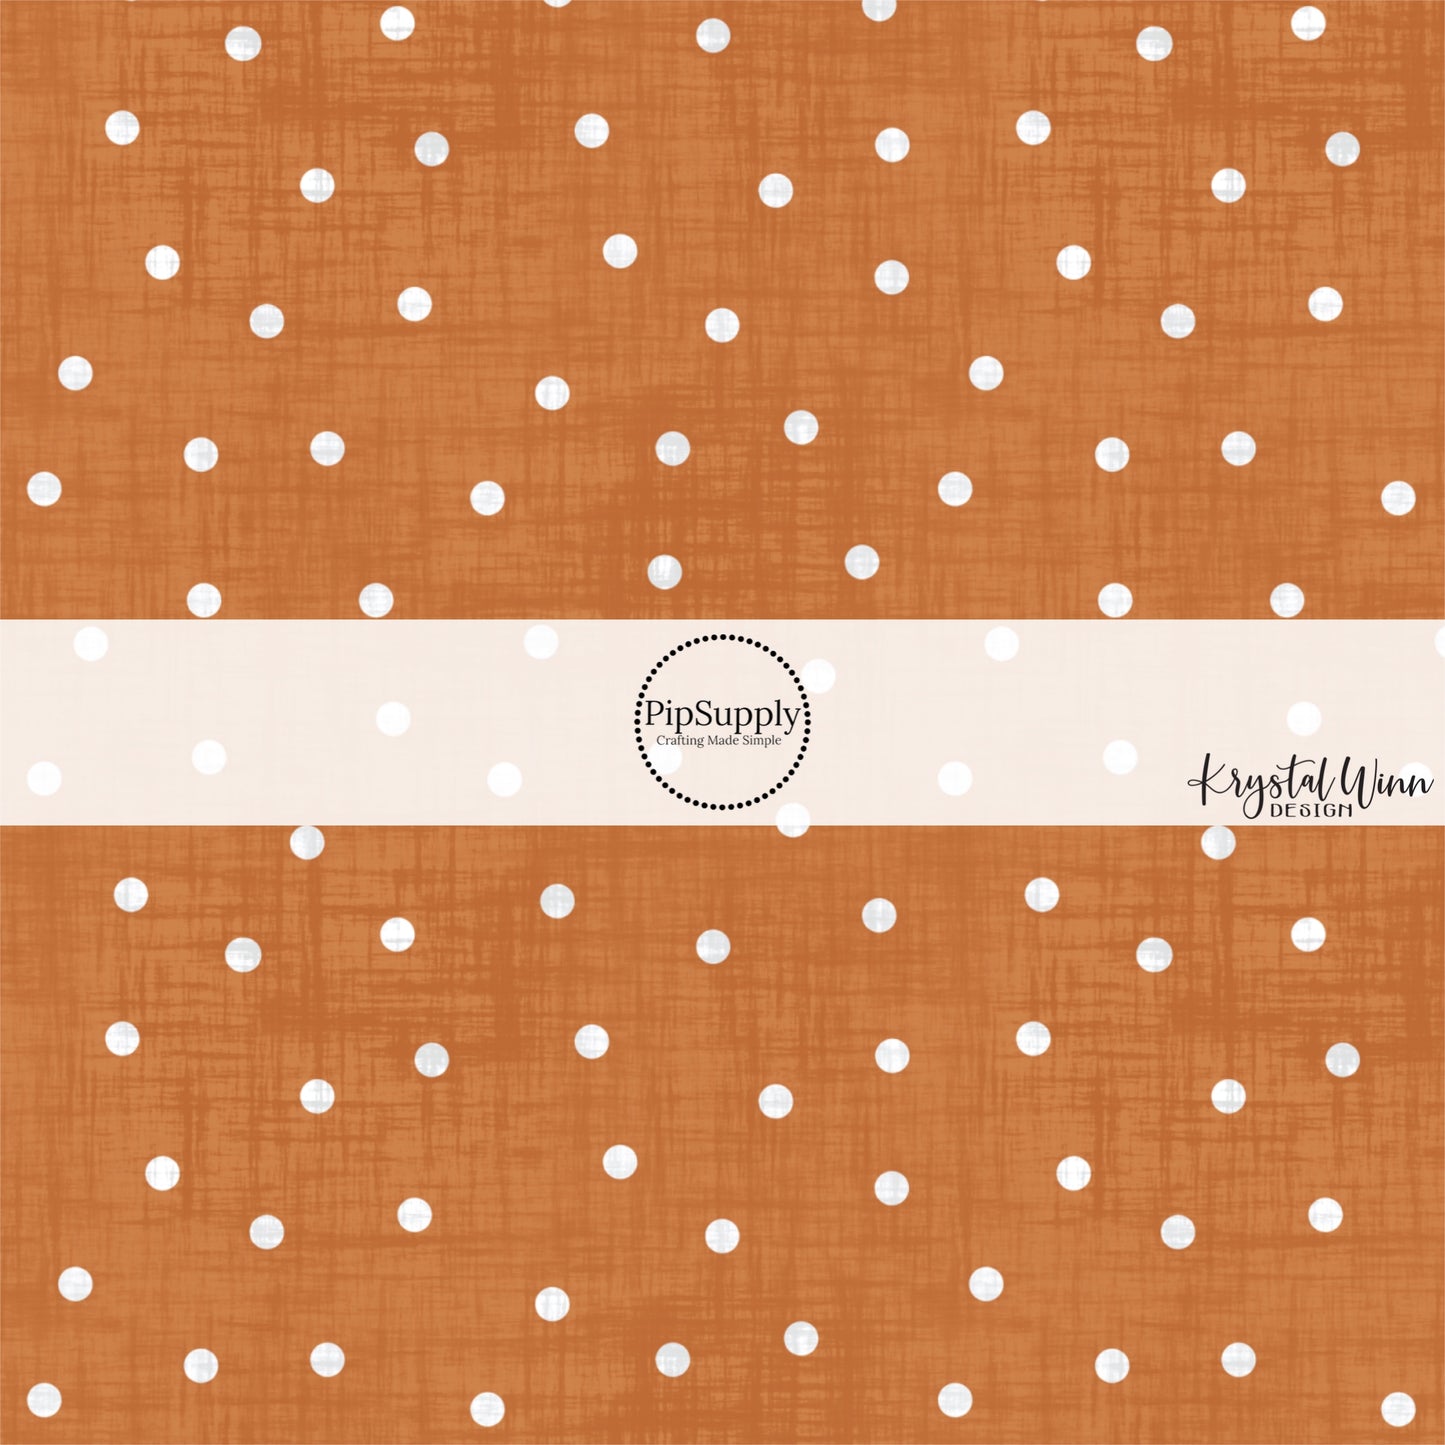 Orange faux linen fabric by the yard with white scattered dots.